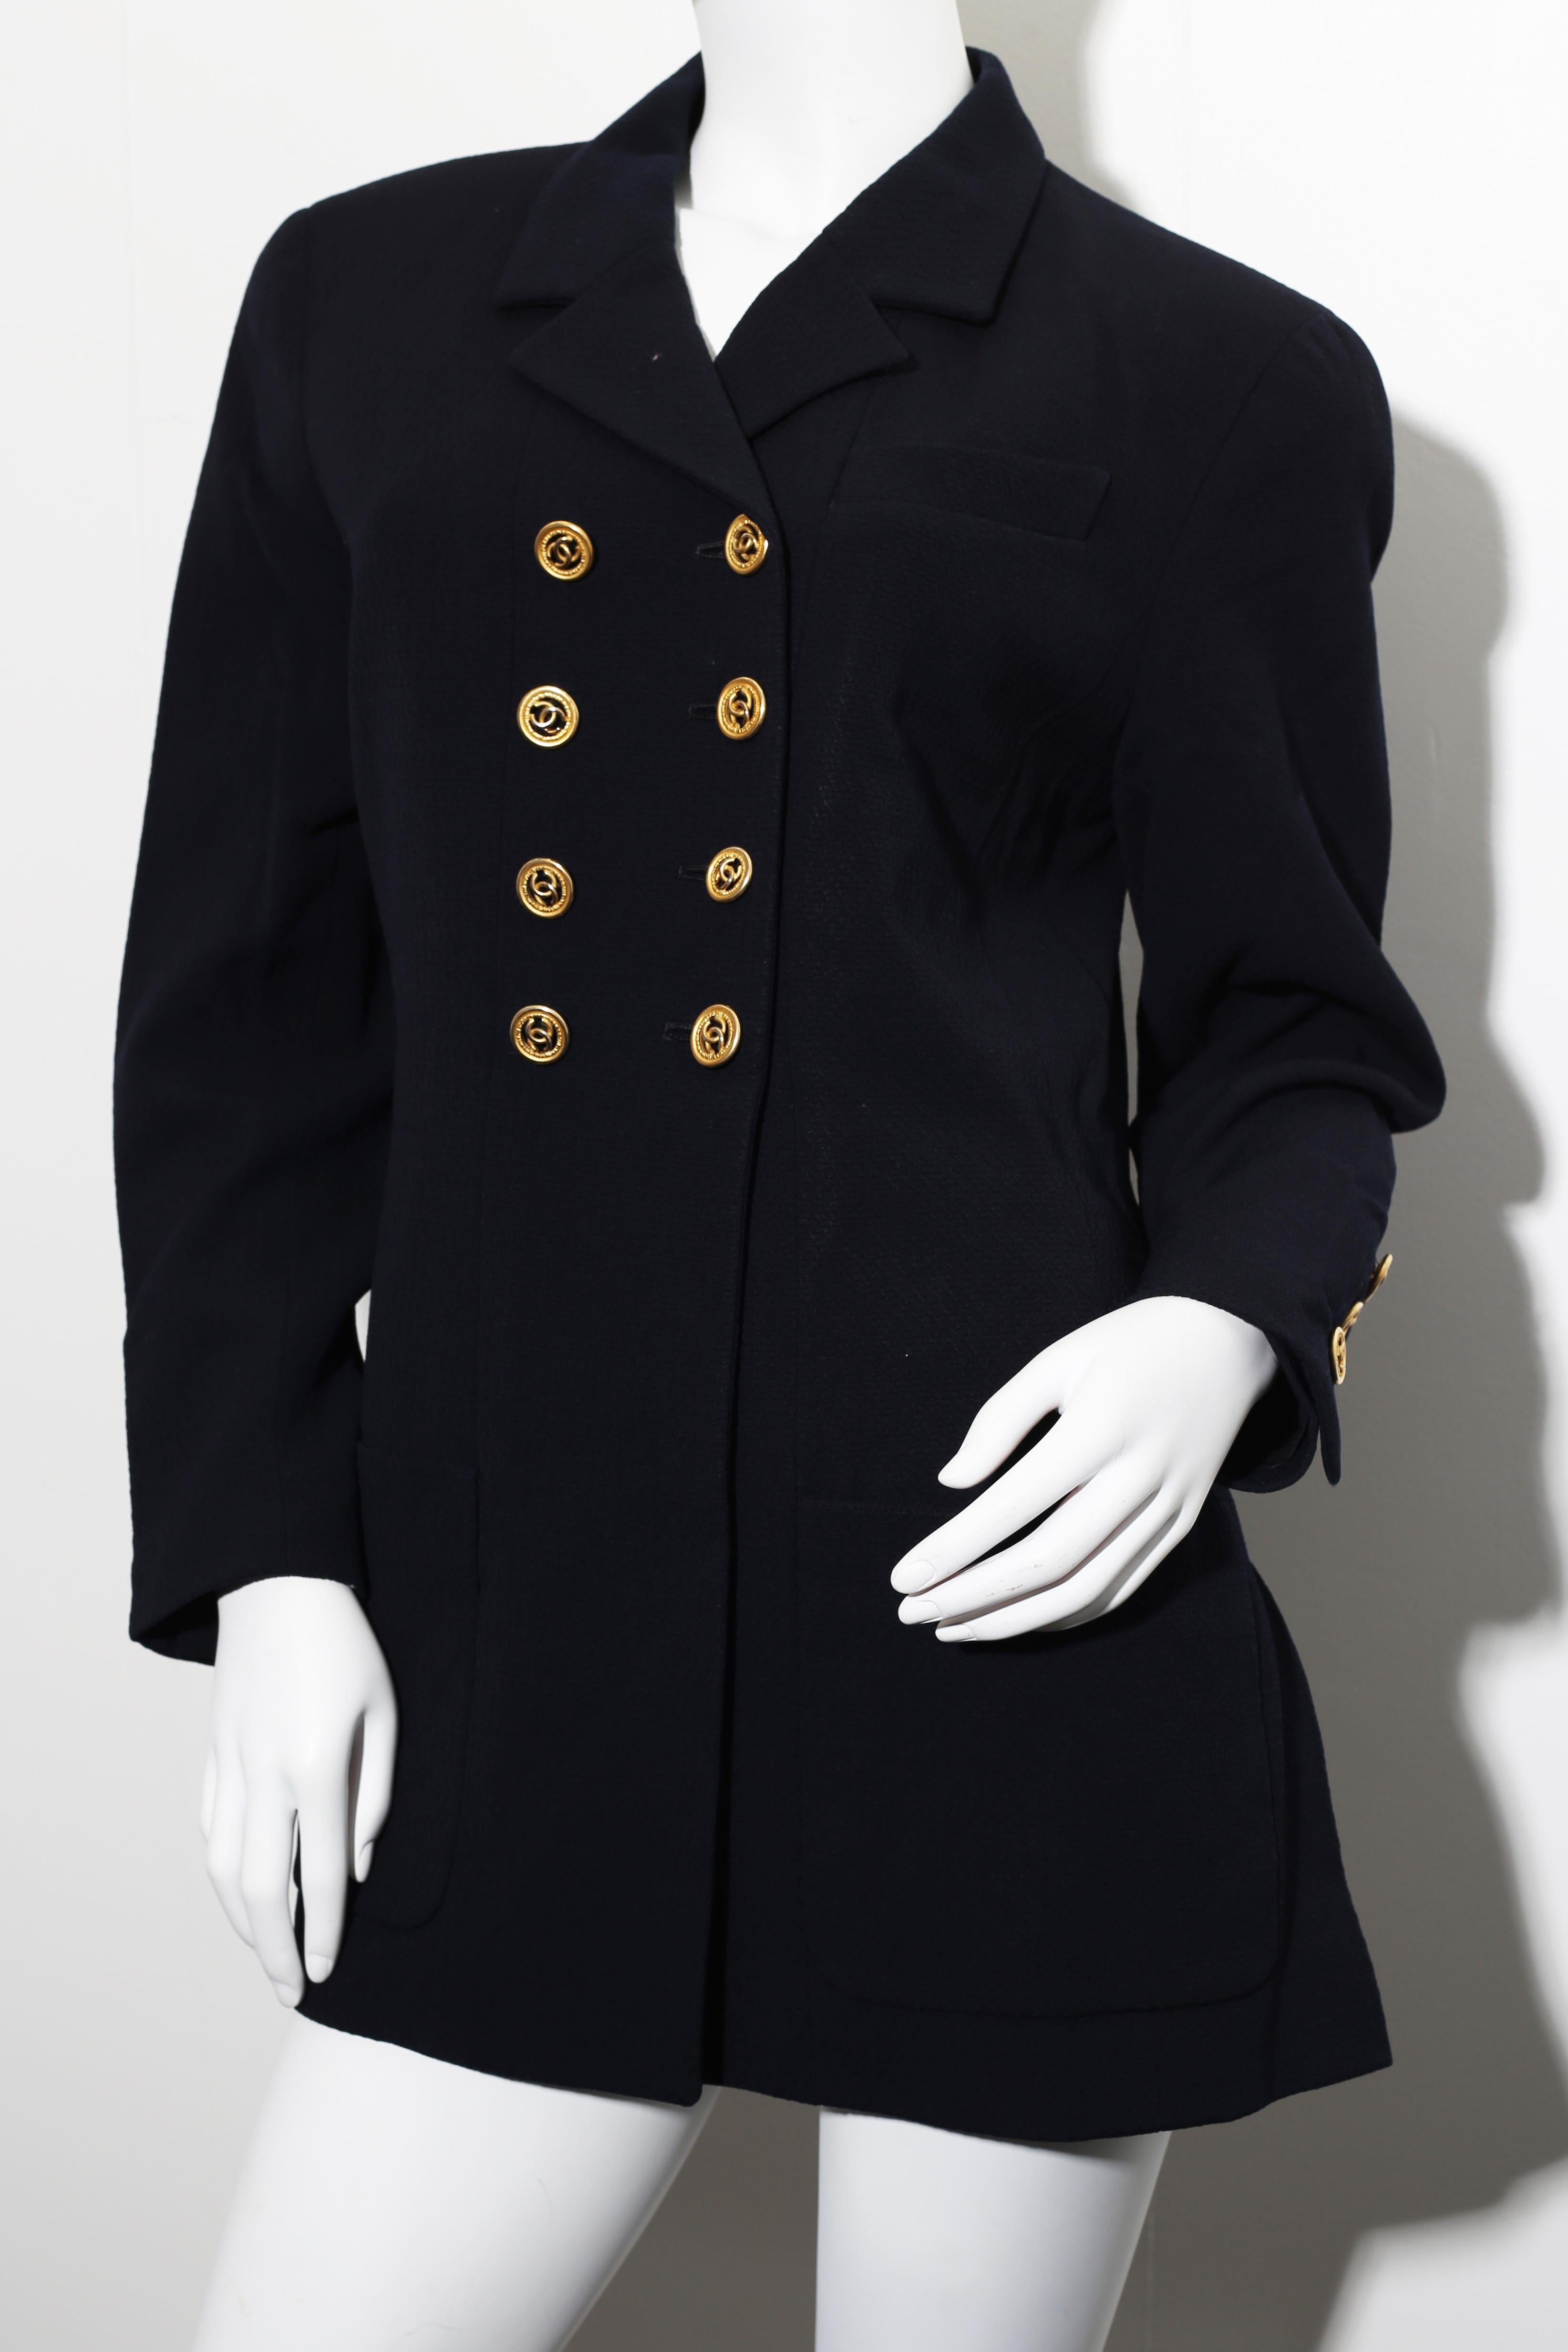 This is a timeless vintage Chanel  navy blue jacket  is 100% Wool with 100% Silk CC branded lining in the jacket. The jacket has black ribbon trim detail and gold CC Chanel buttons 8 in the front and 3 and 3 on the sleeves. The jacket has 2 lower